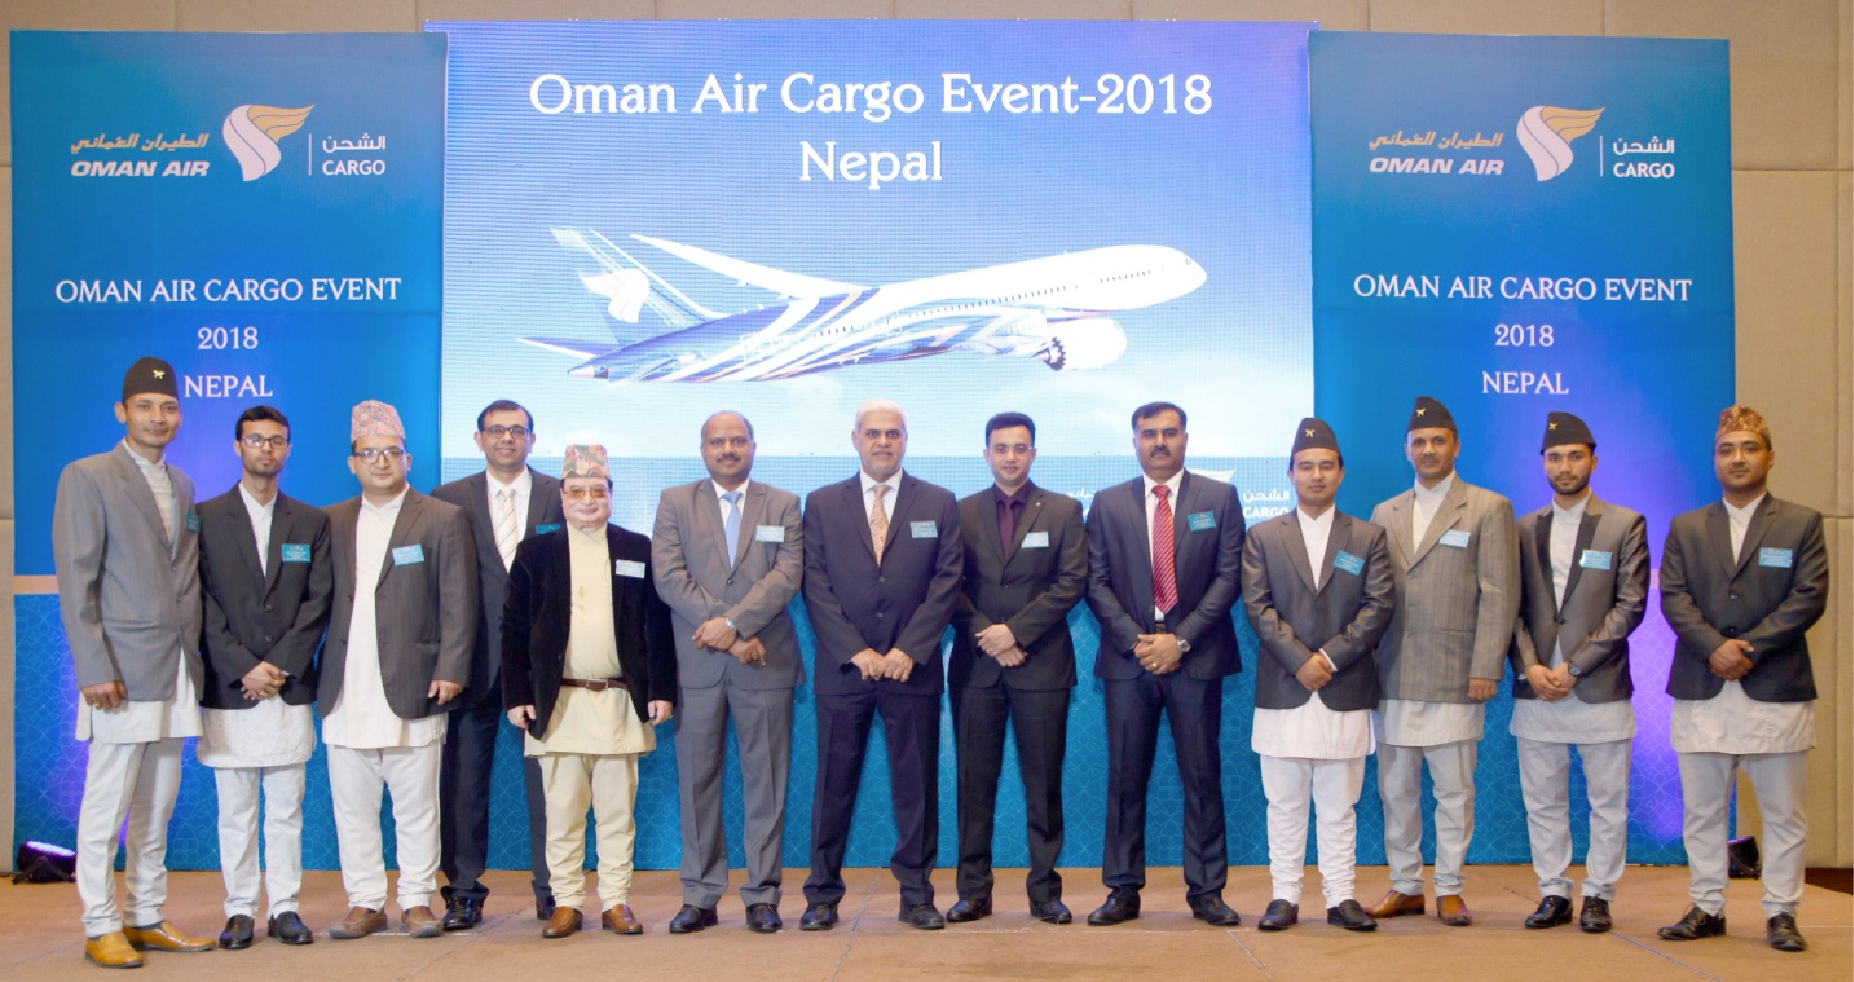 Photo from Oman air Event-2018 Nepal